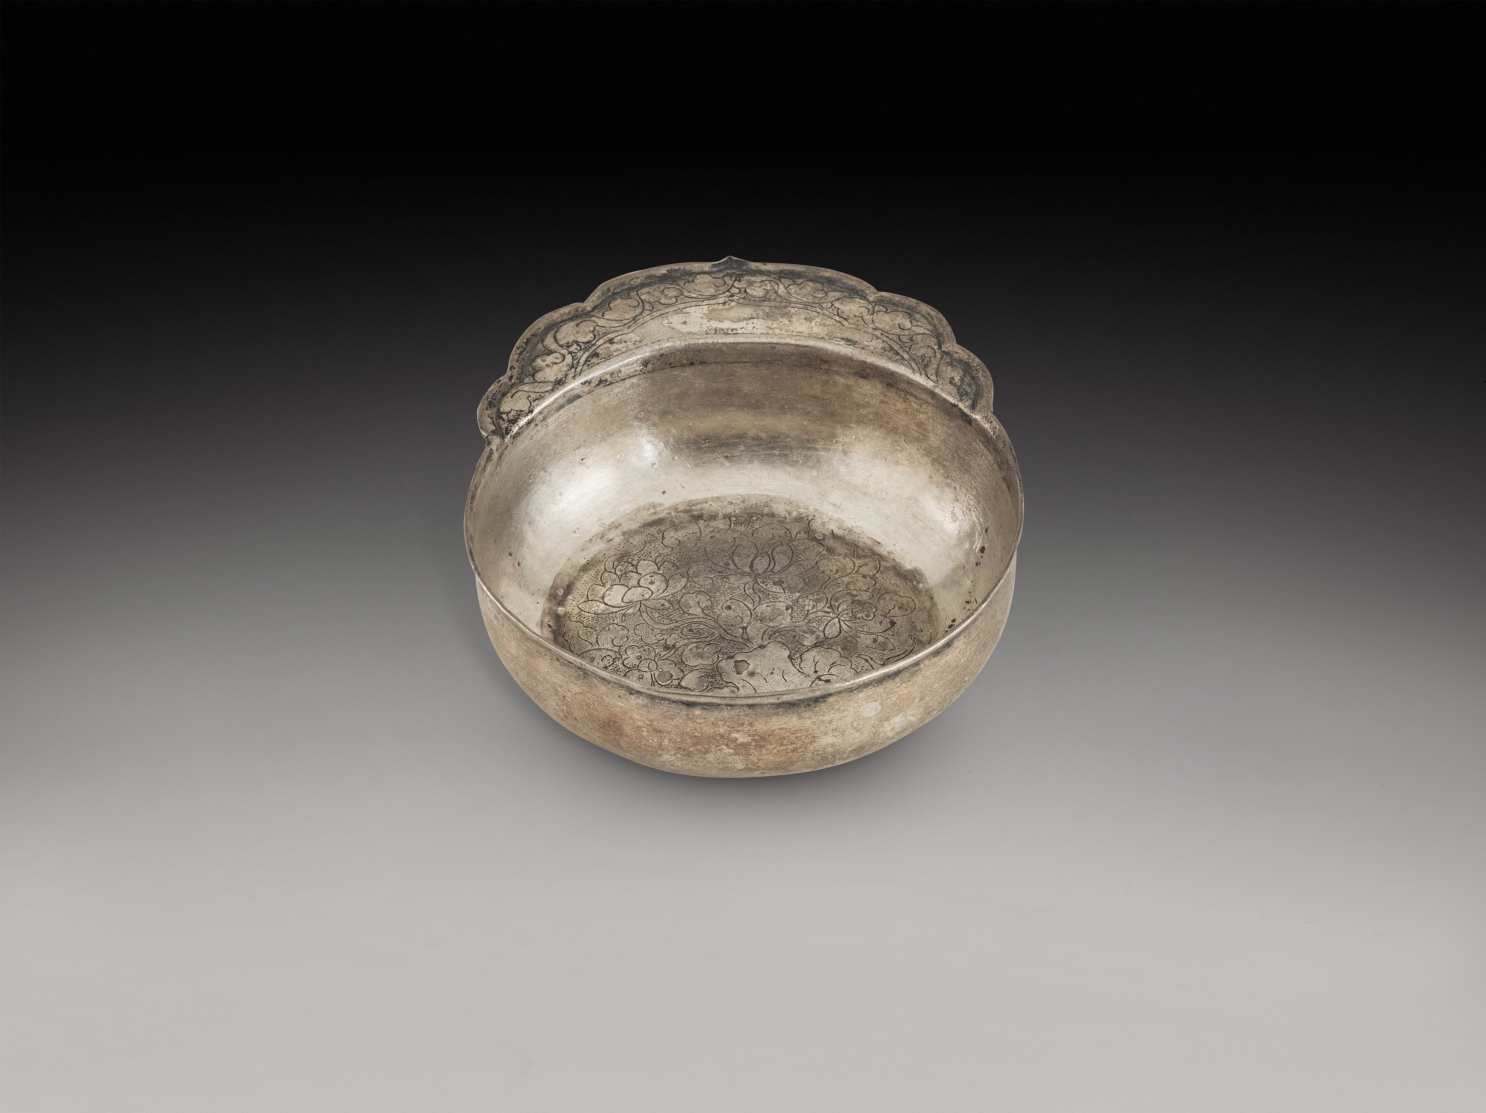 An engraved silver handled cup, Northern Song dynasty | 北宋 銀單把盃 - Image 4 of 5